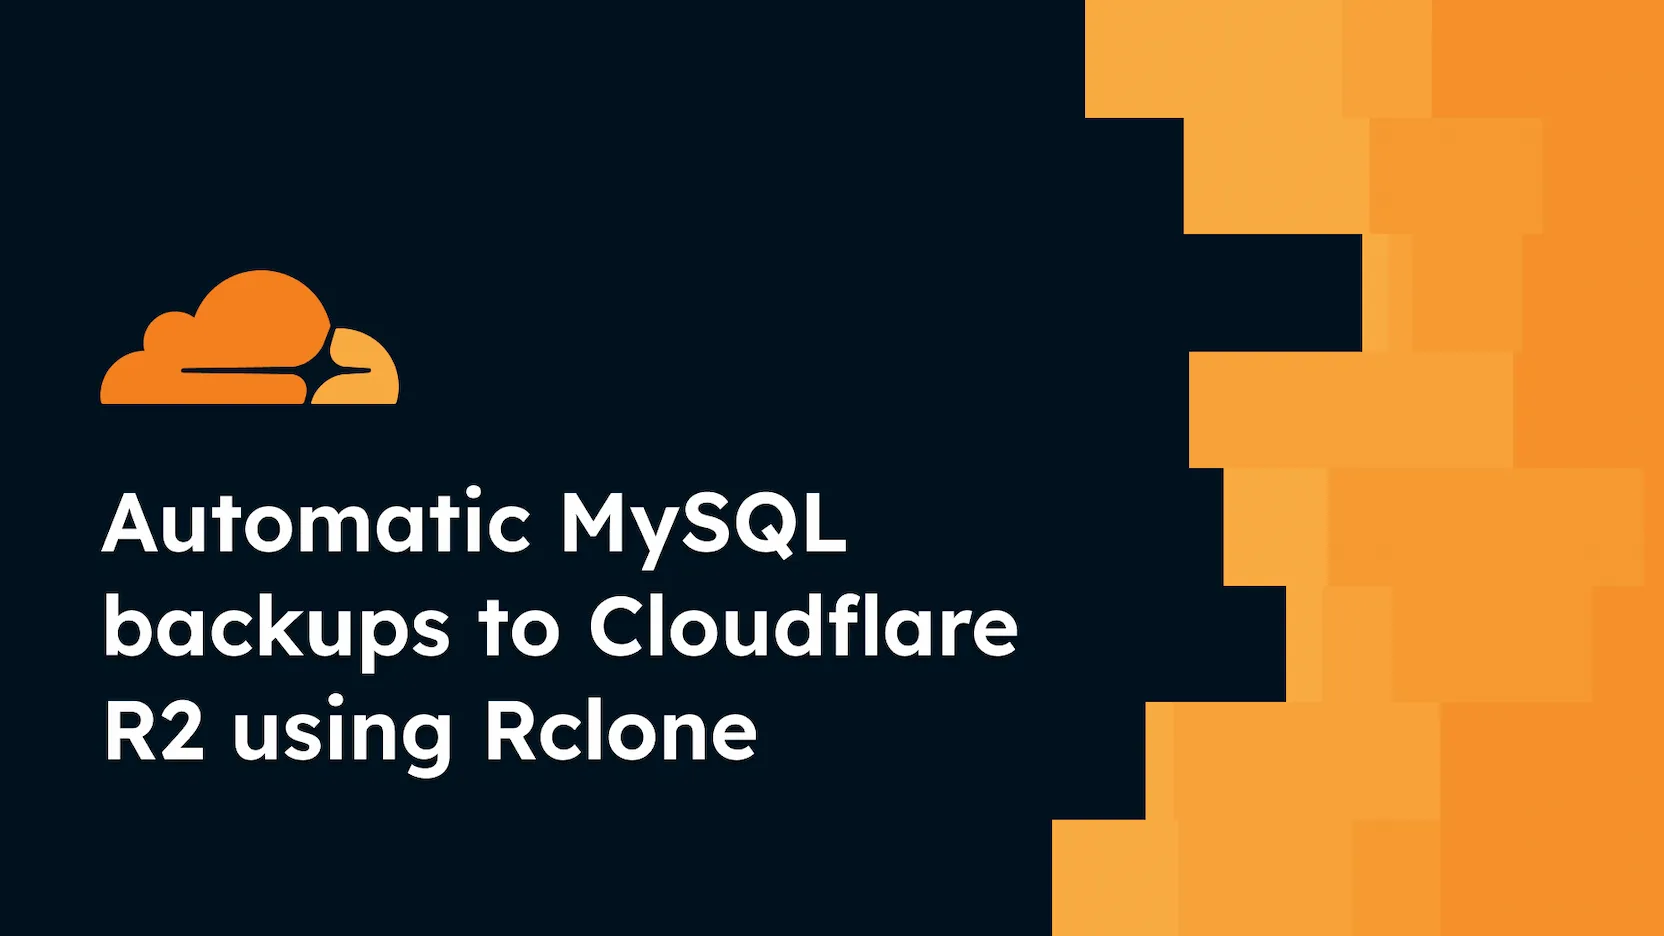 Automatic MySQL backups to Cloudflare R2 using Rclone